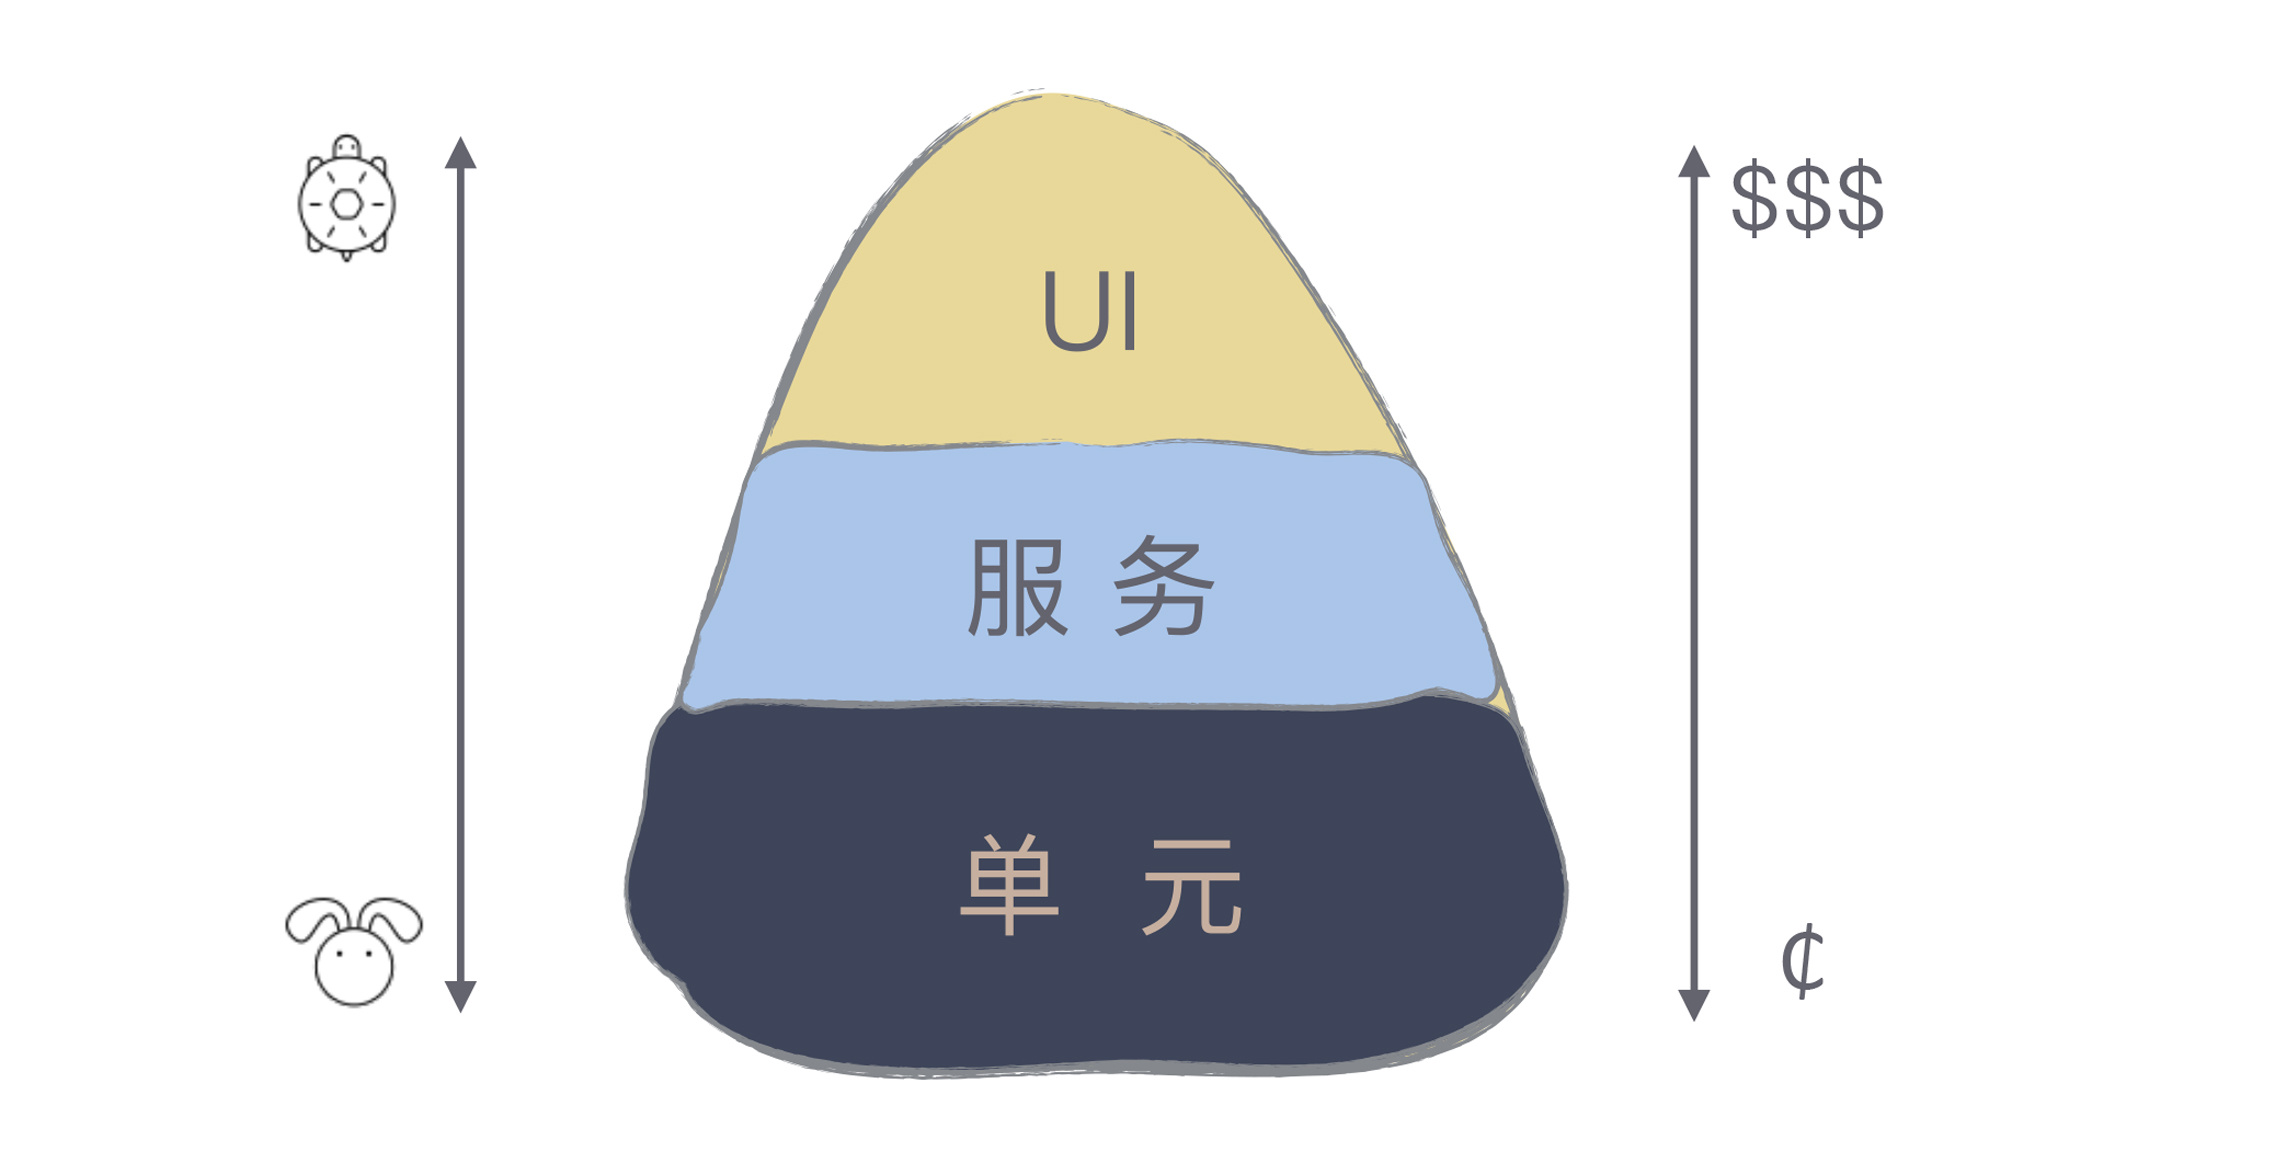 https://img.zhaoweiguo.com/knowledge/images/testings/model2_pyramid.jpeg